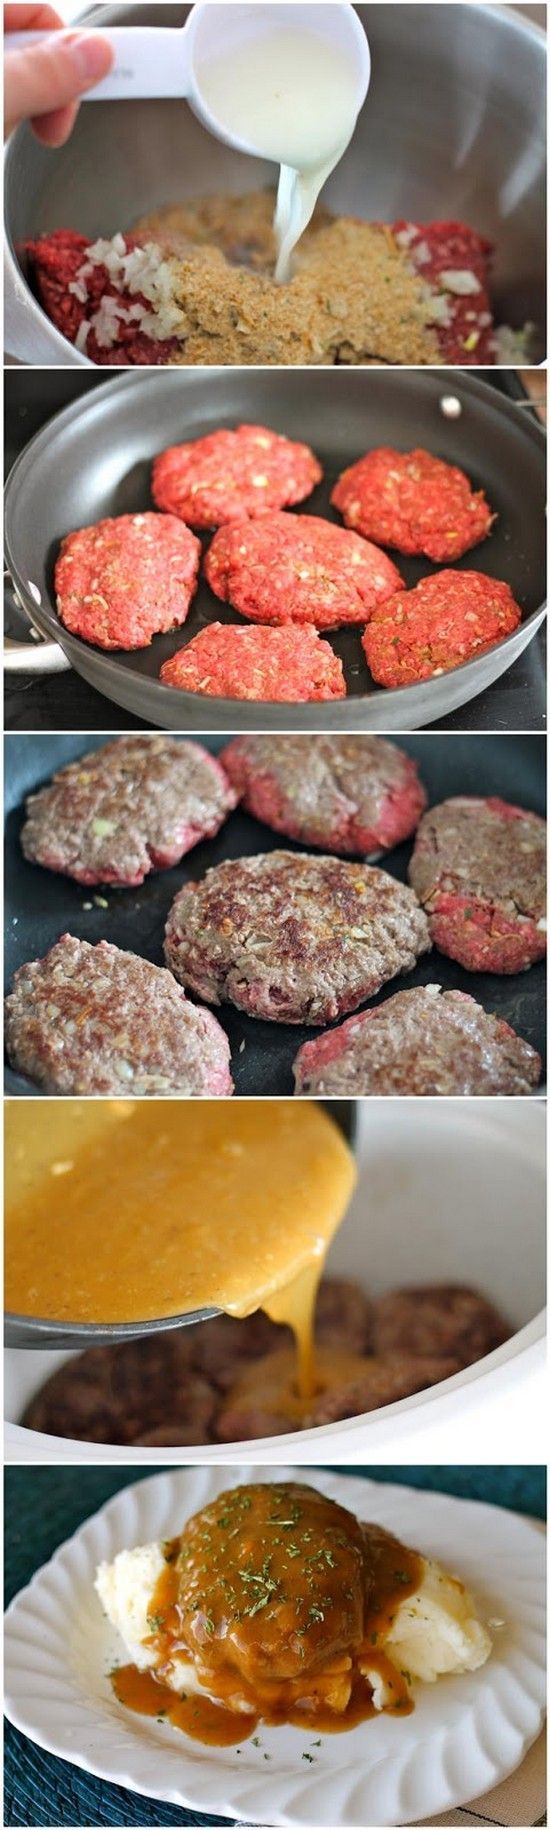 Slow Cooker Salisbury Steaks | This recipe goes together quickly and does not need a lot of time in the slow cooker. It’s a delicious way to add flavor to ground beef and the children love it! The